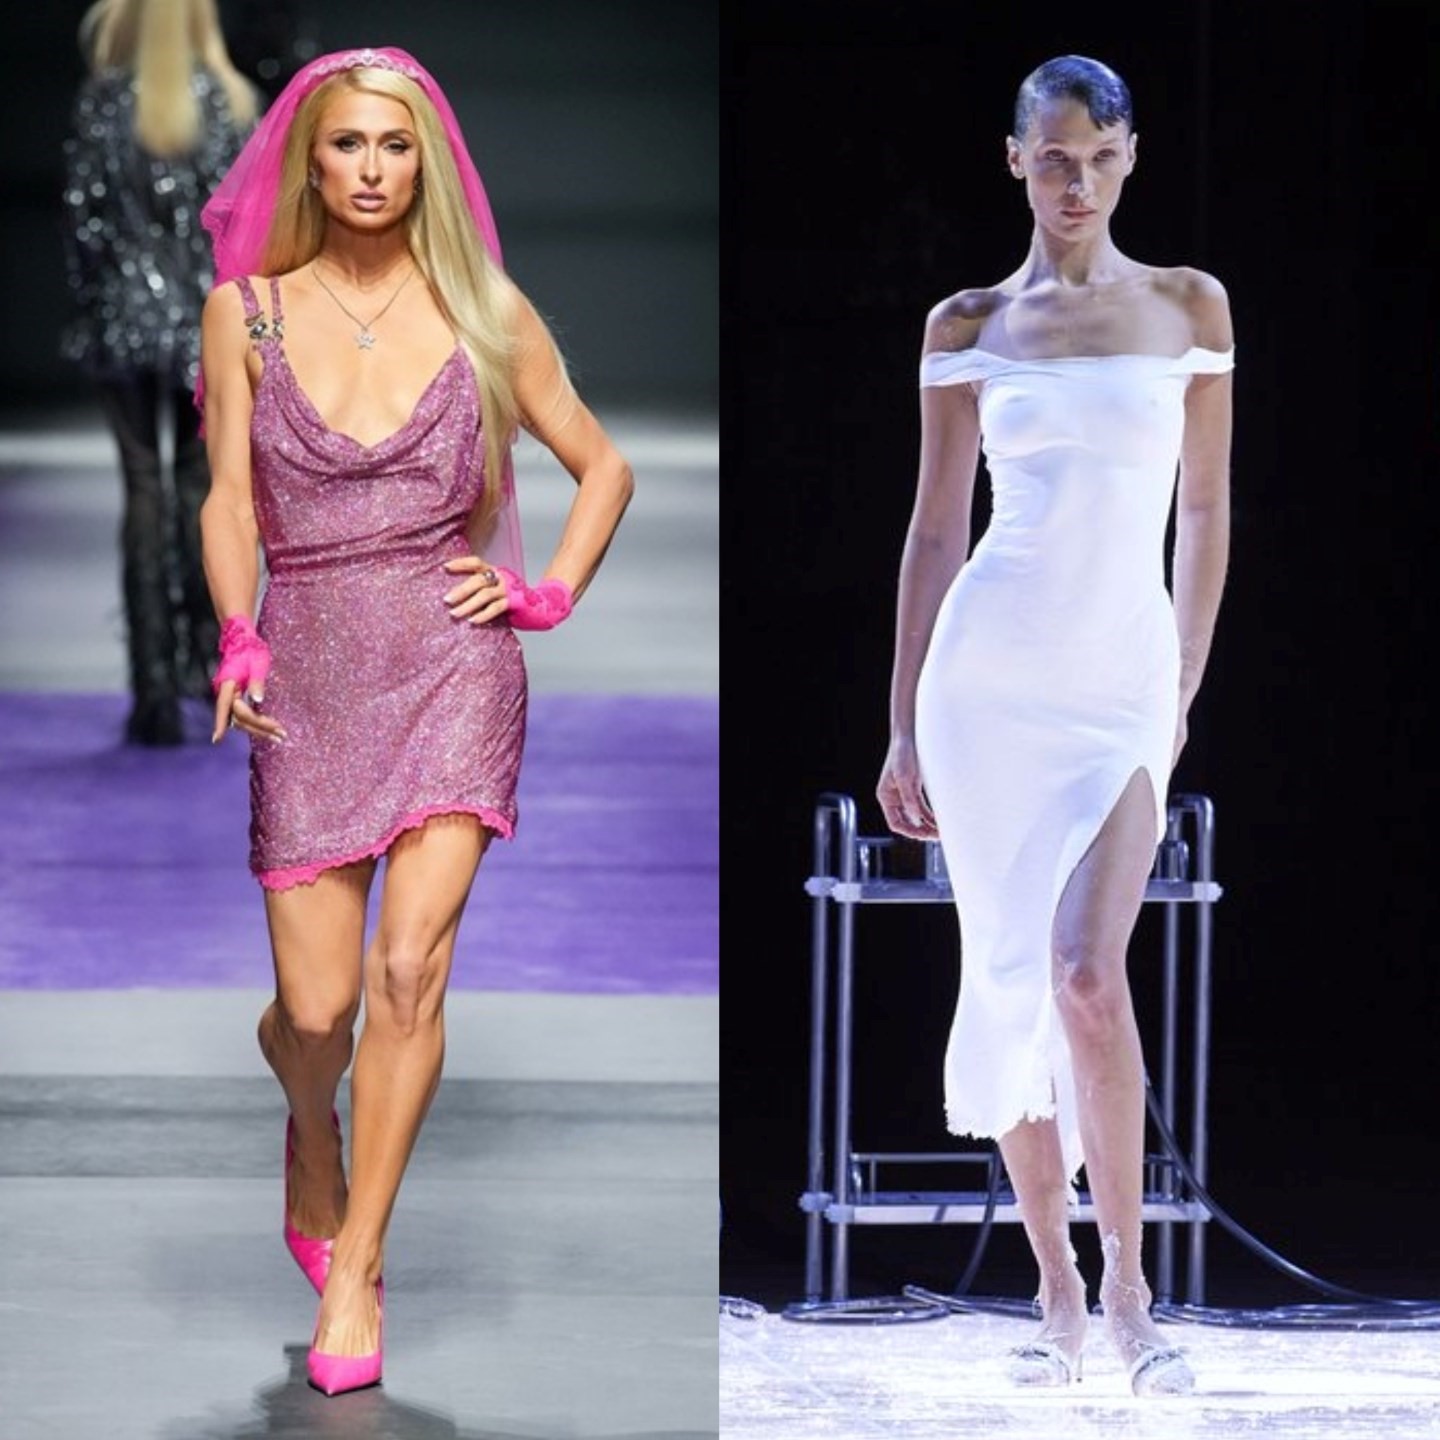 In defence of the fashion runway gimmick